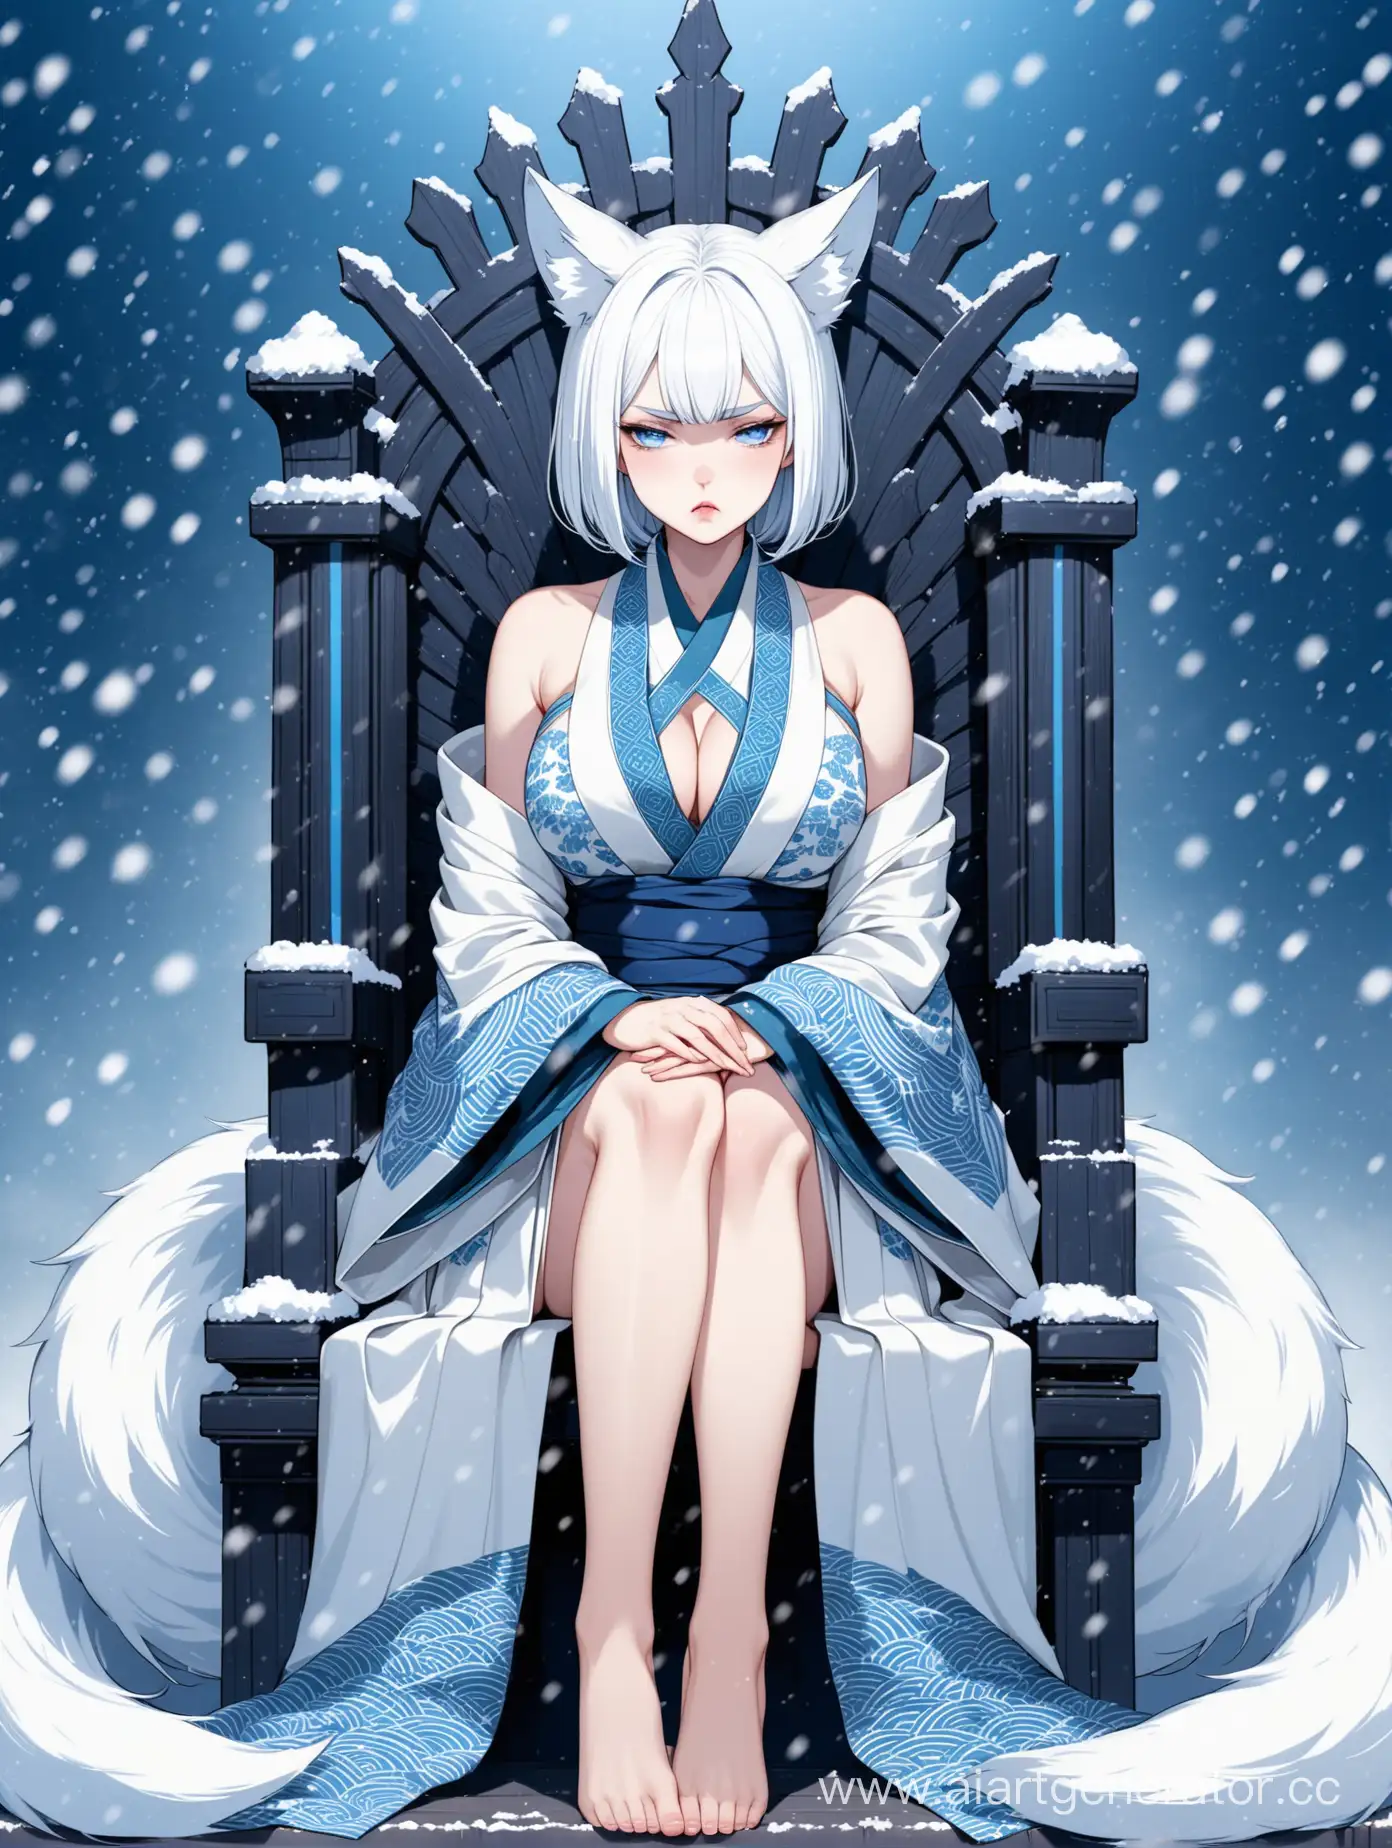 beautiful very pale woman with white fox ears, bob cut white hair, cold blue eyes, disgusted look, pout, cold blue lips, white kimono with blue patterns, big cleavage visible shoulders, sitting on throne with hands on crossed legs, it is winter, it is snowing, full body view, 